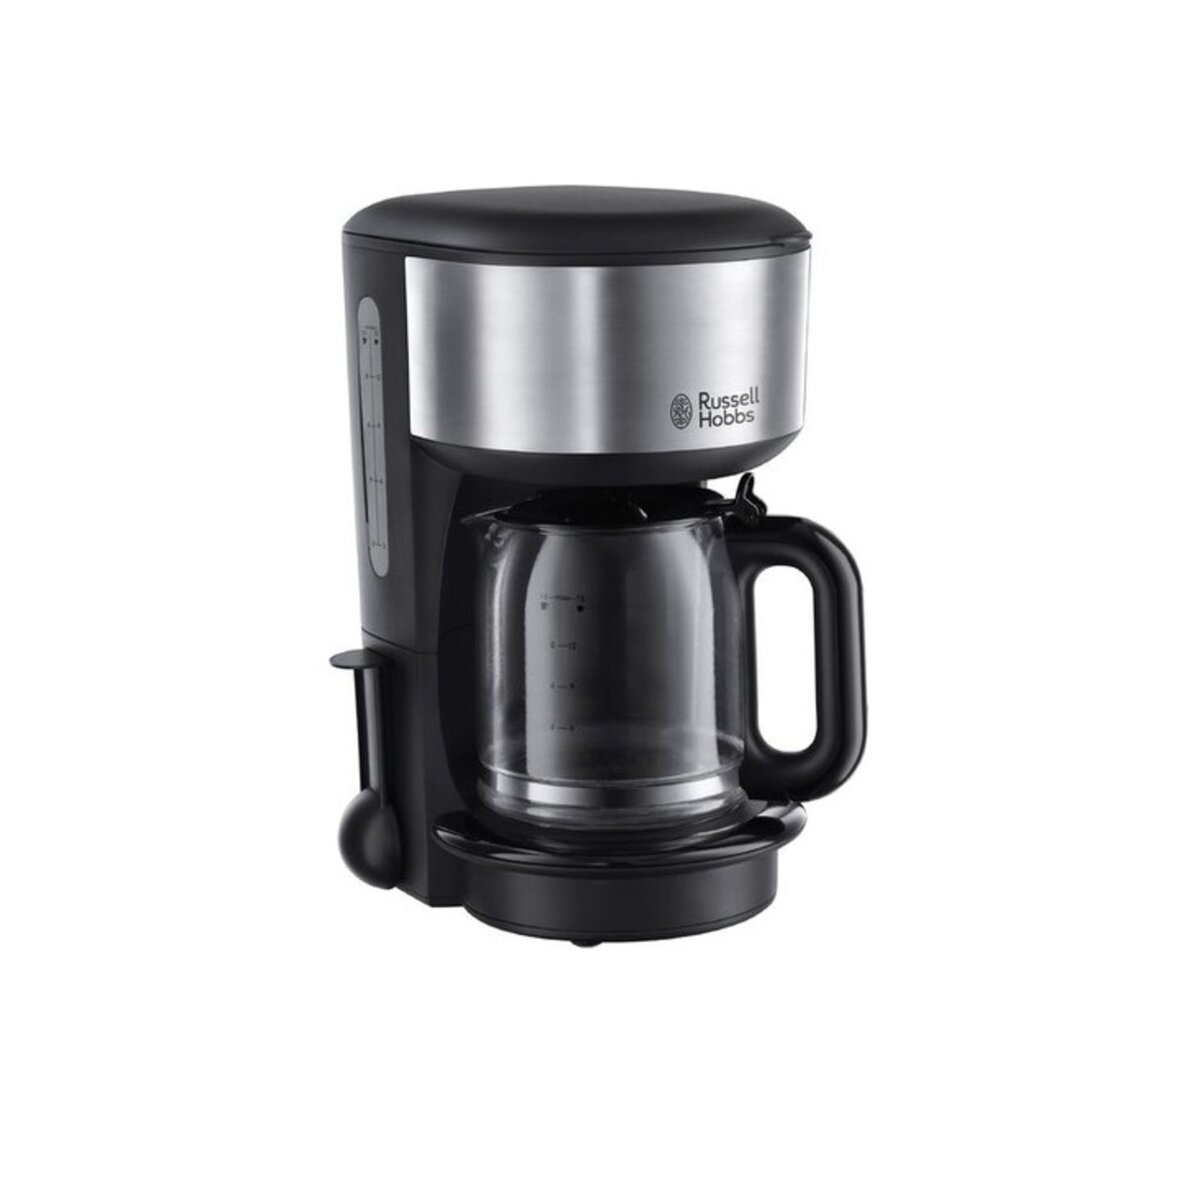 RUSSELL HOBBS Cafetiere Oxford 20130-56 Inox